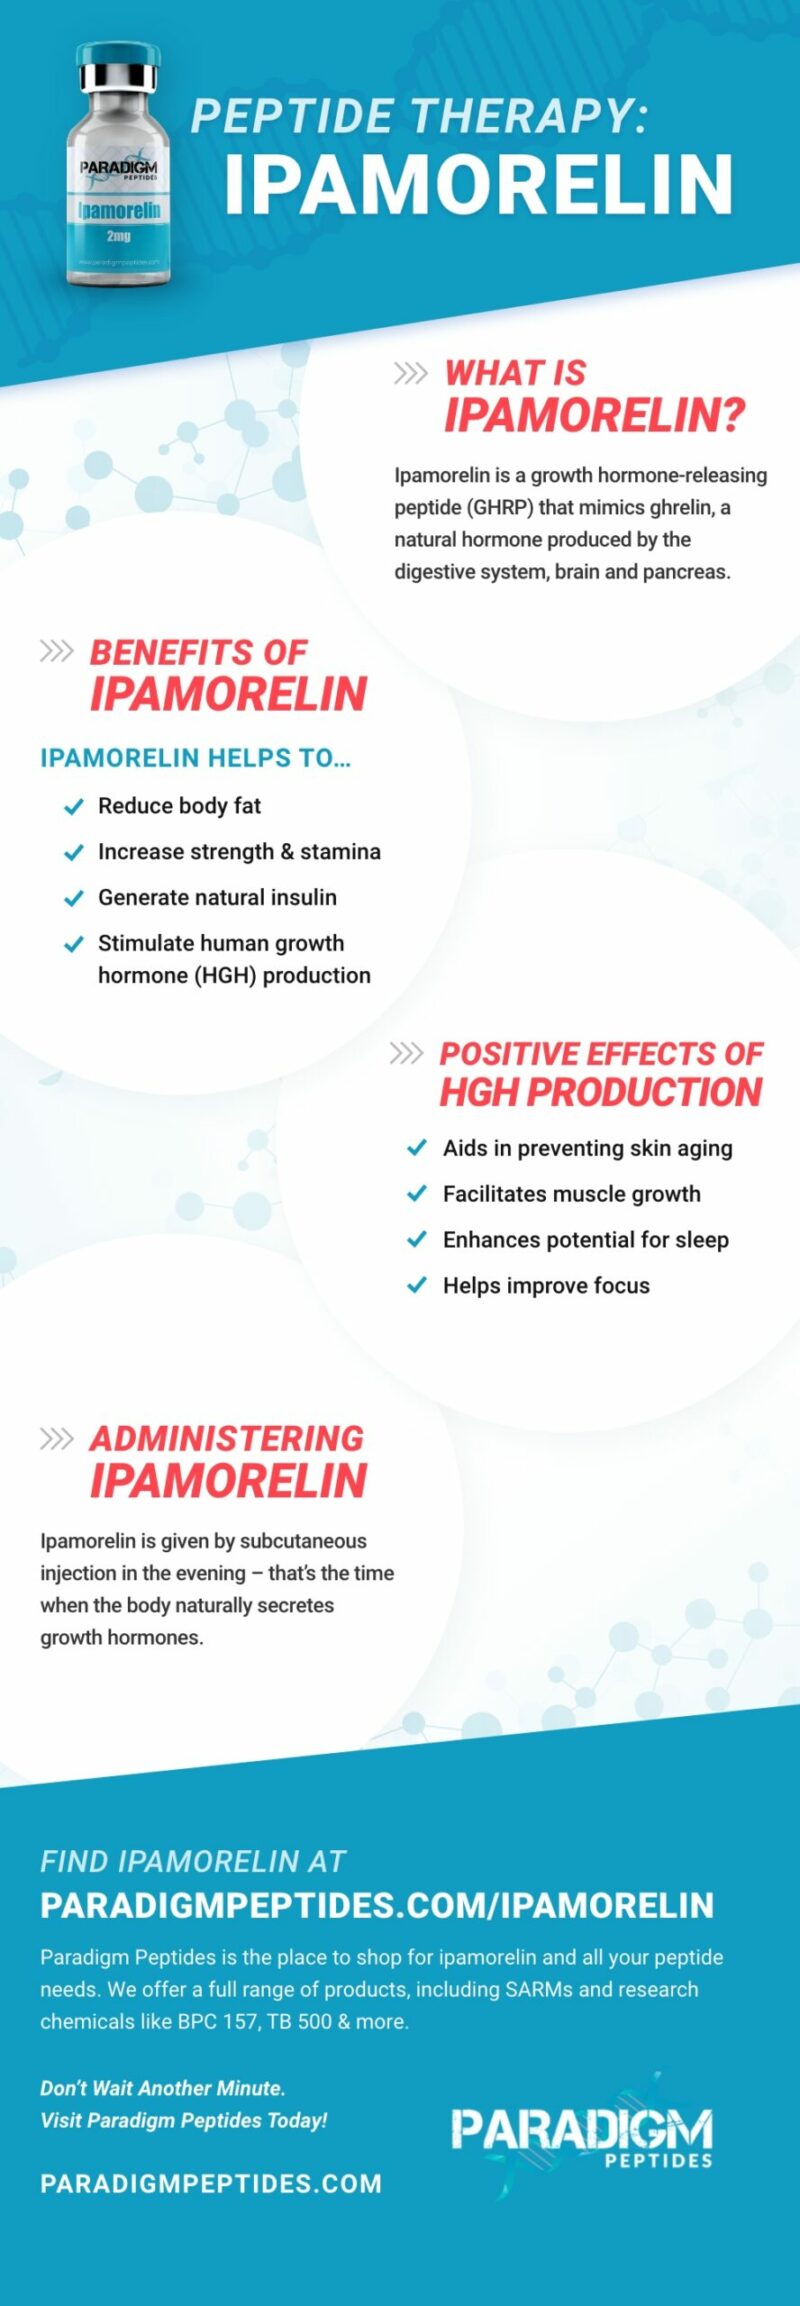 Peptide Therapy: Ipamorelin